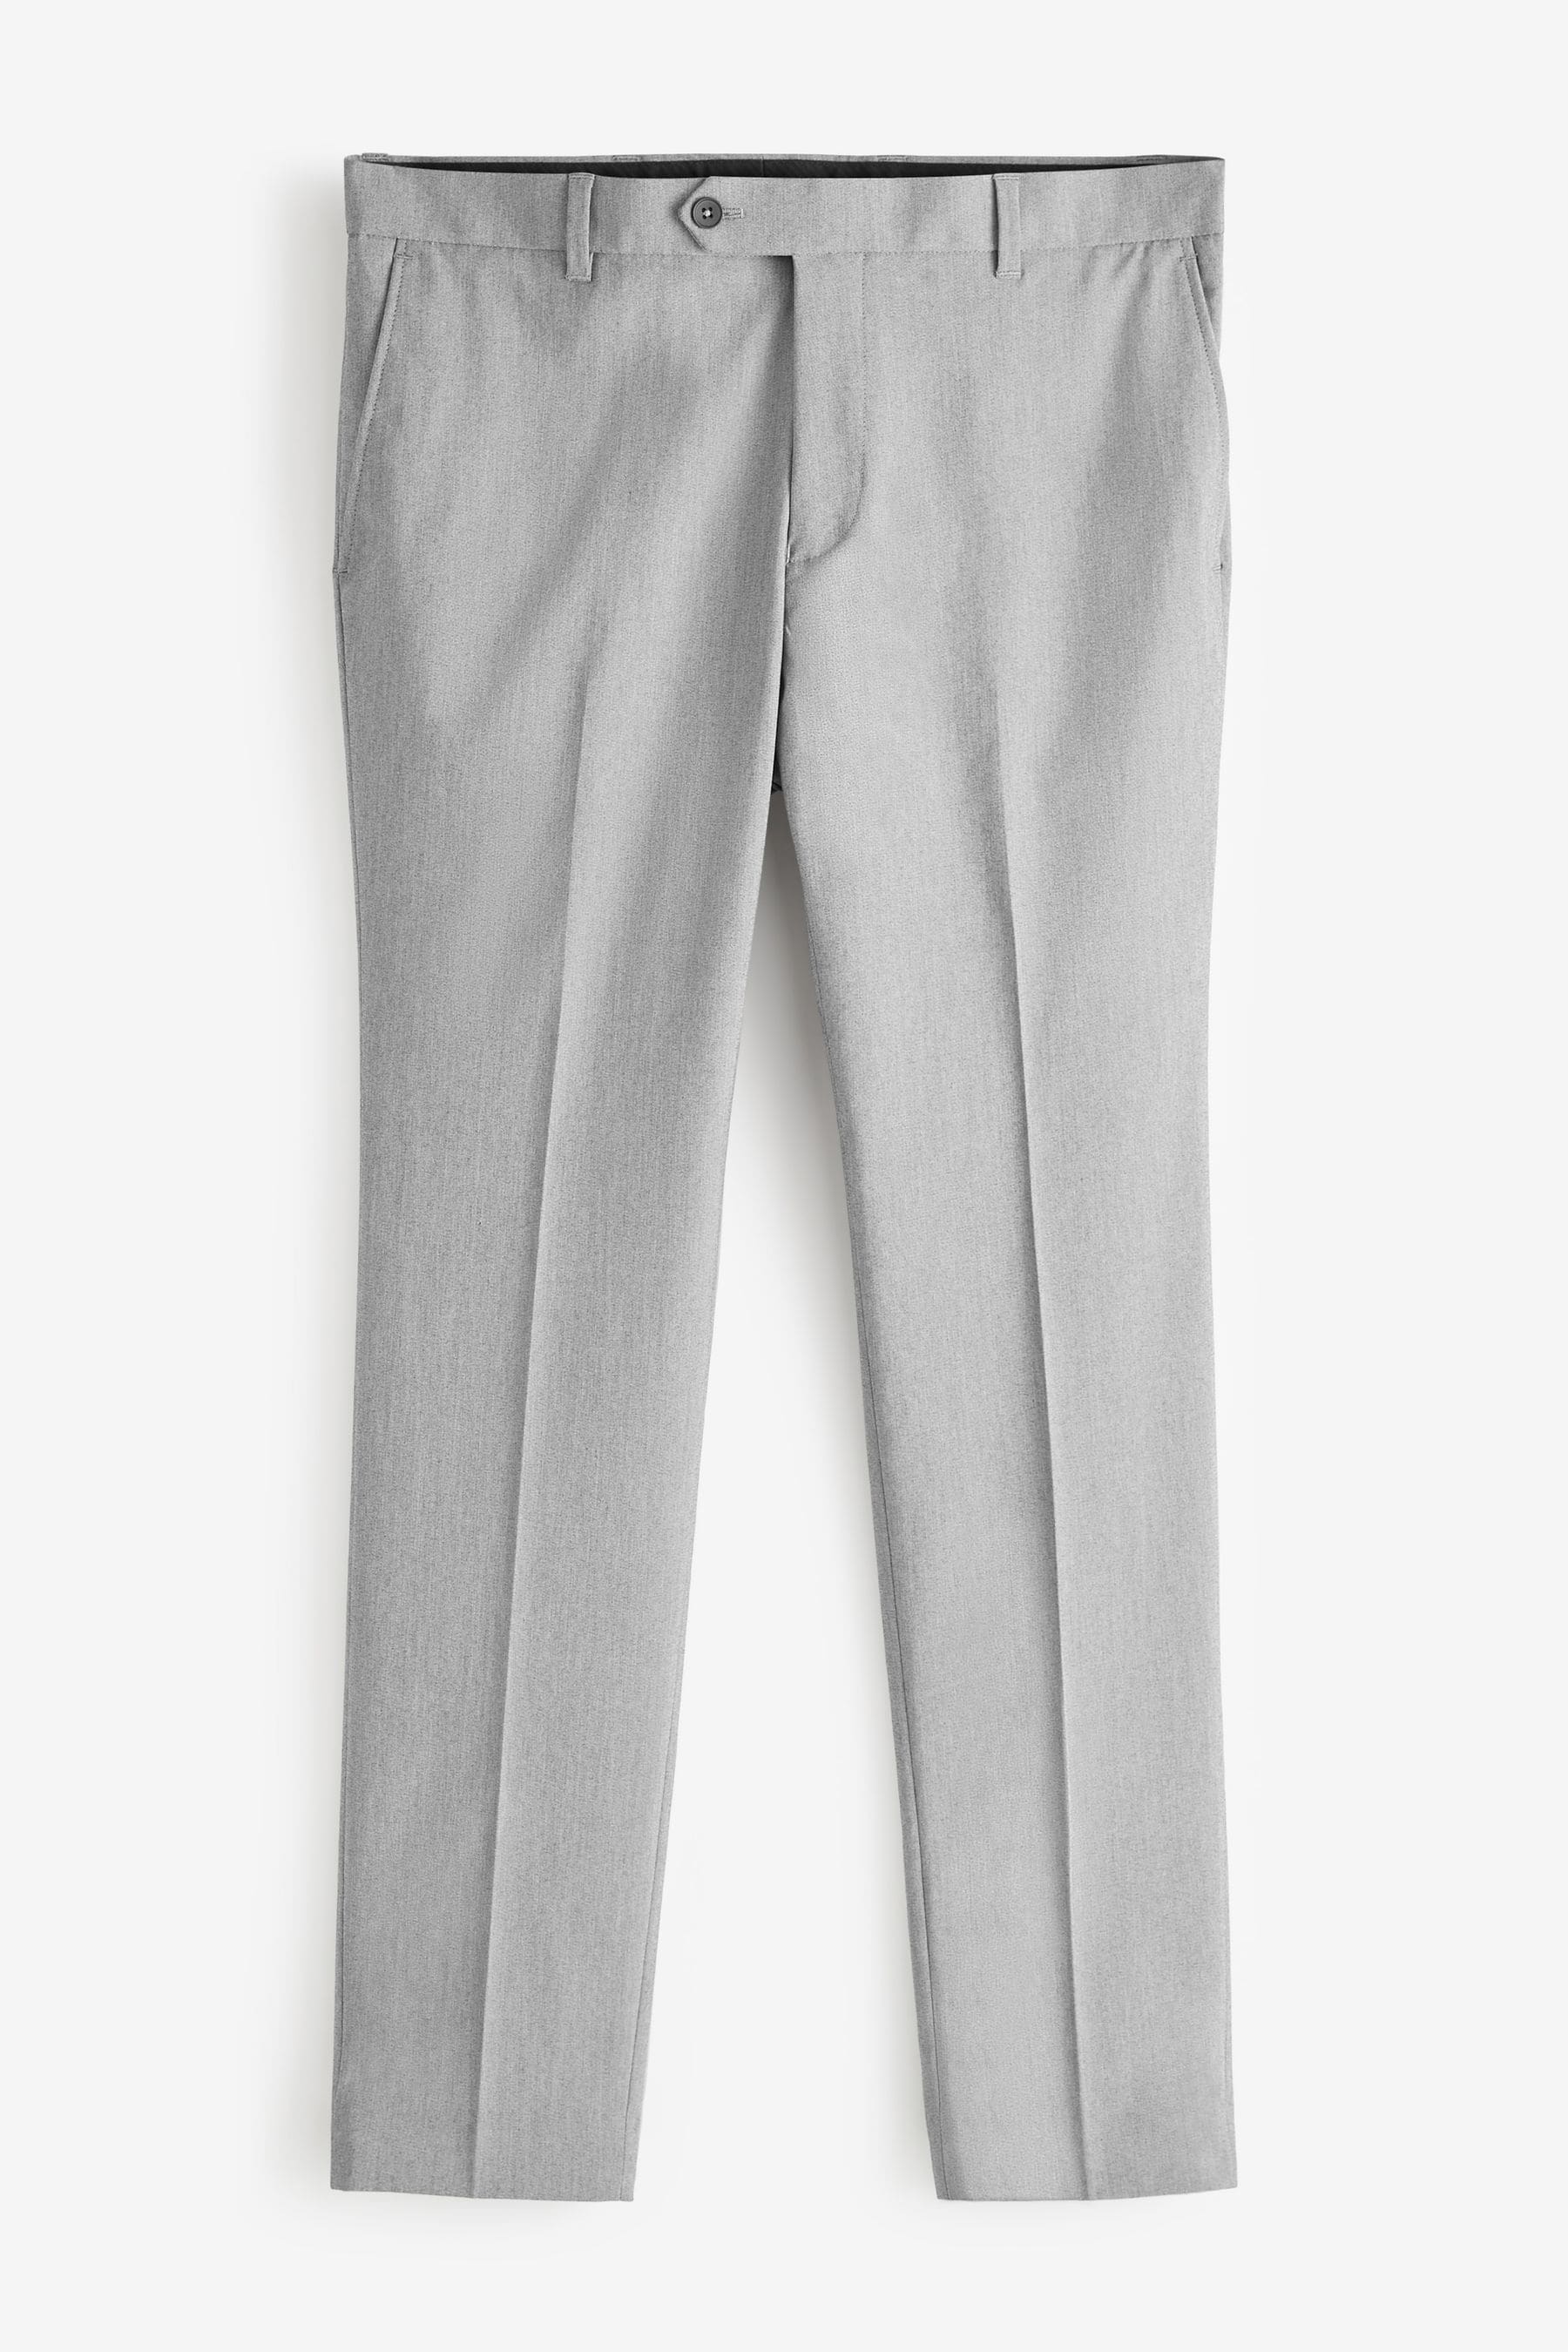 Buy Light Grey Skinny Stretch Smart Trousers from the Next UK online shop